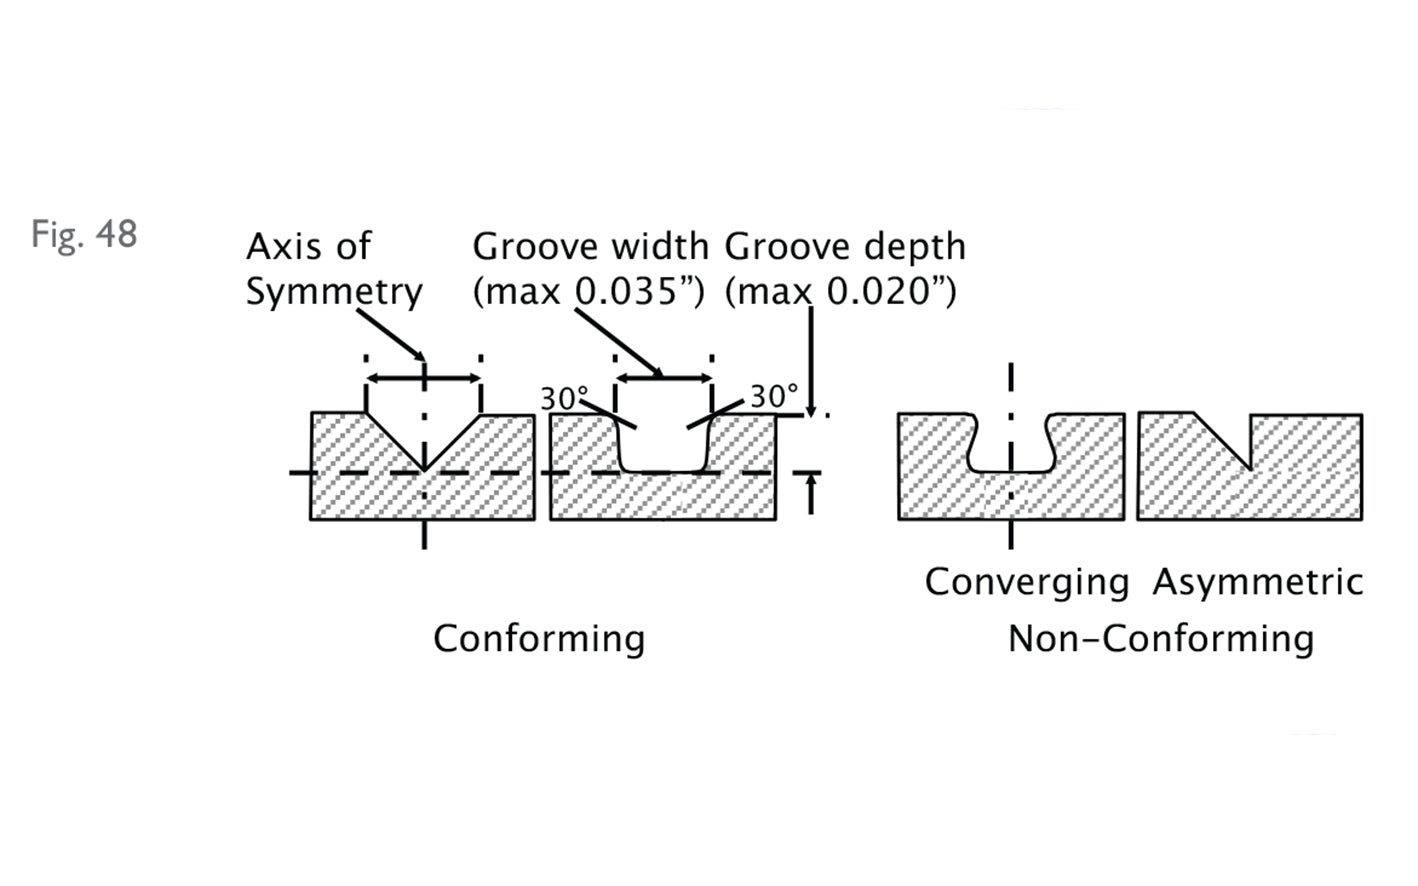 Fig 48:  Groove cross-section